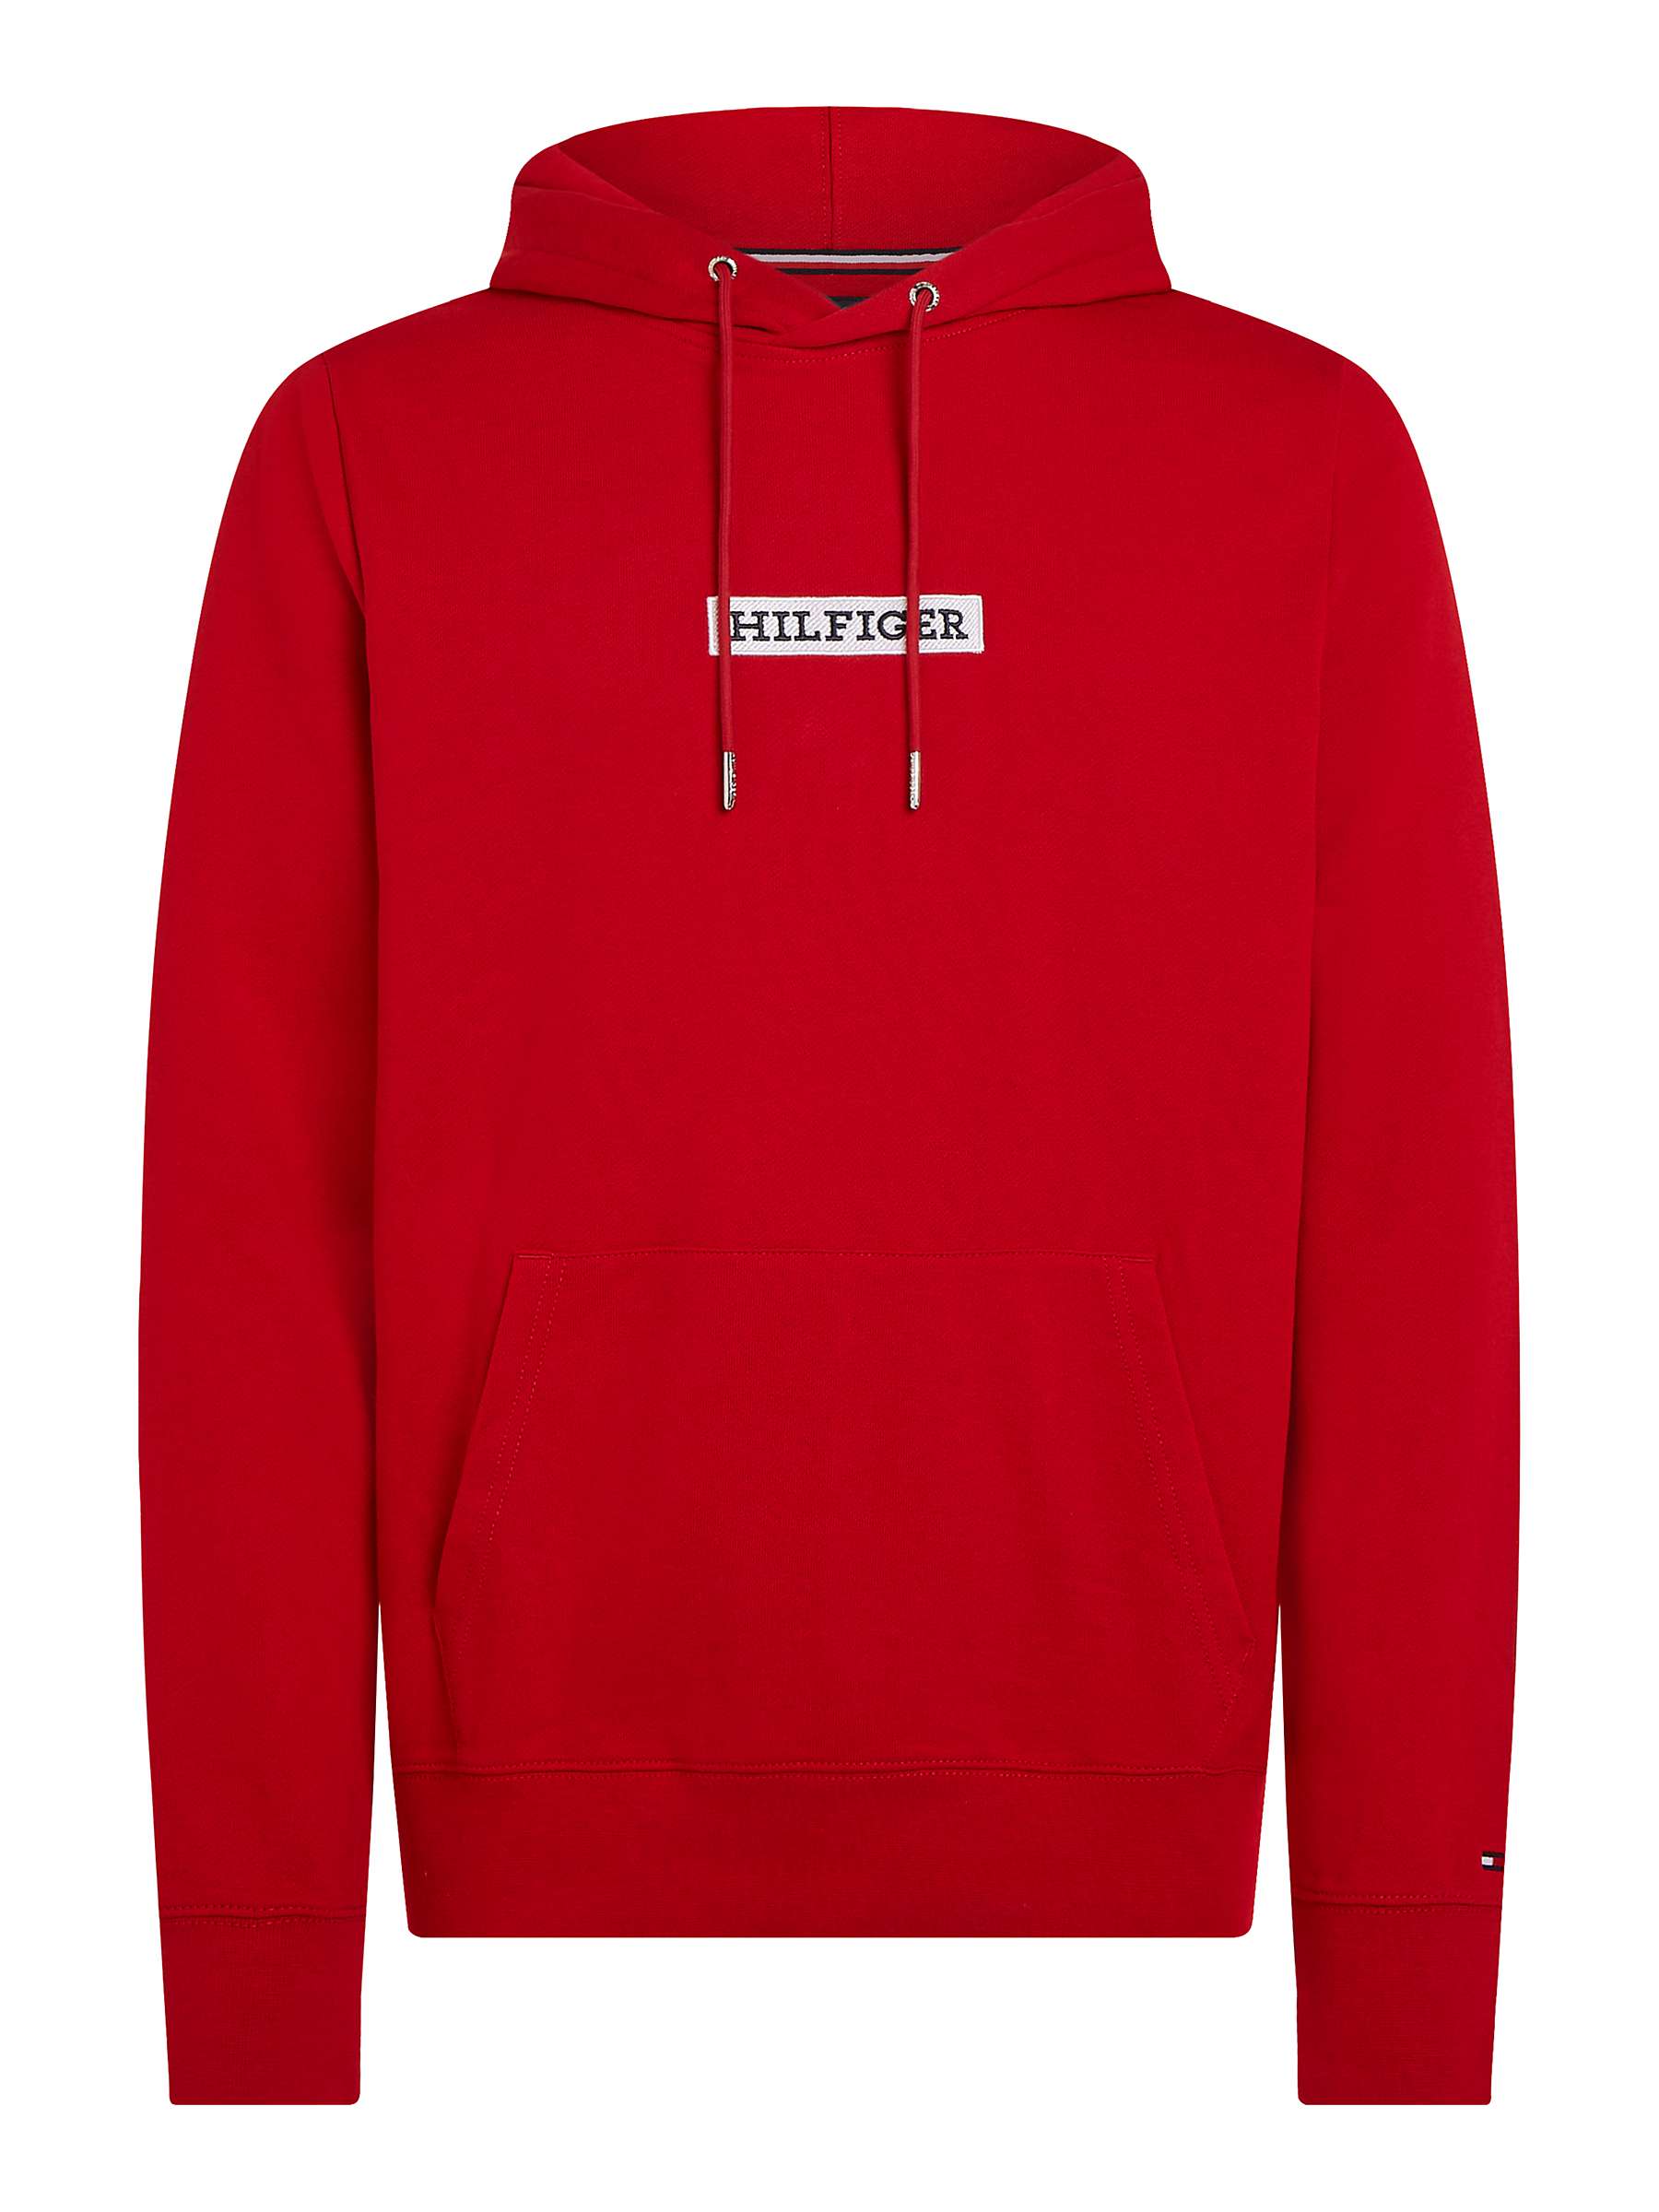 Buy Tommy Hilfiger Monotype Box Pullover Hoodie, Red Online at johnlewis.com